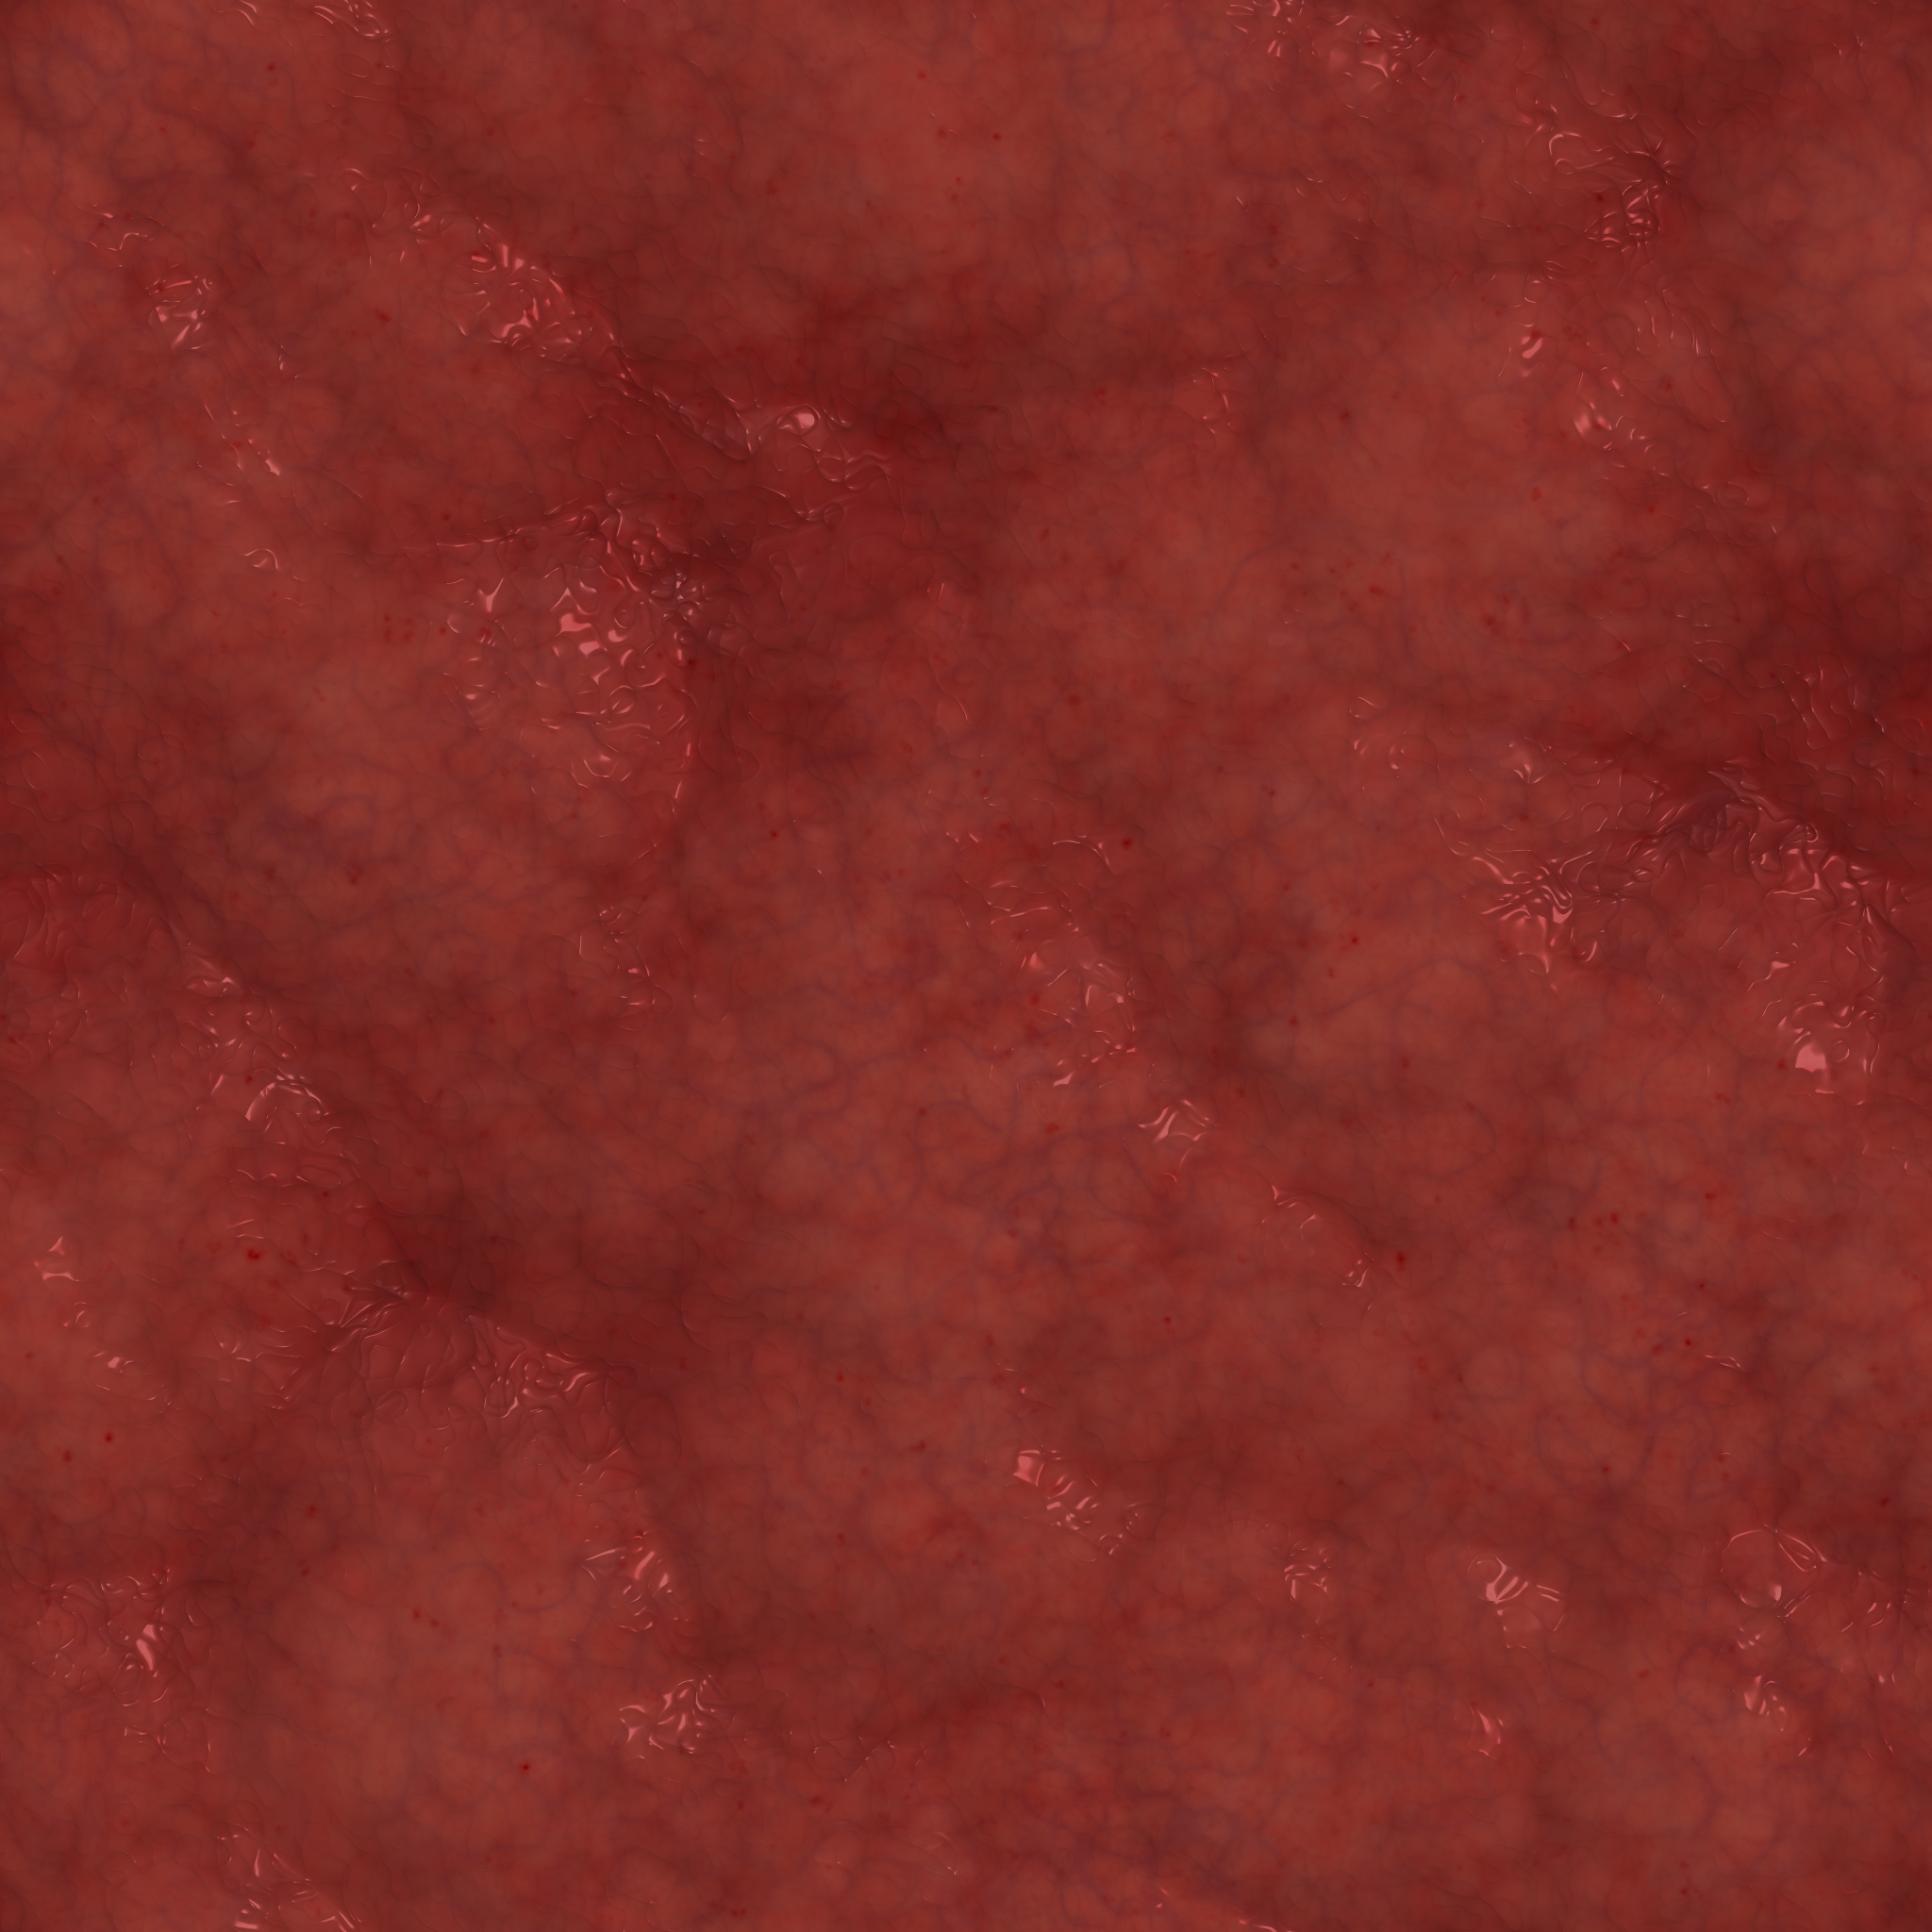 flesh_wall_02_by_hoover1979-dbx5i3r.png